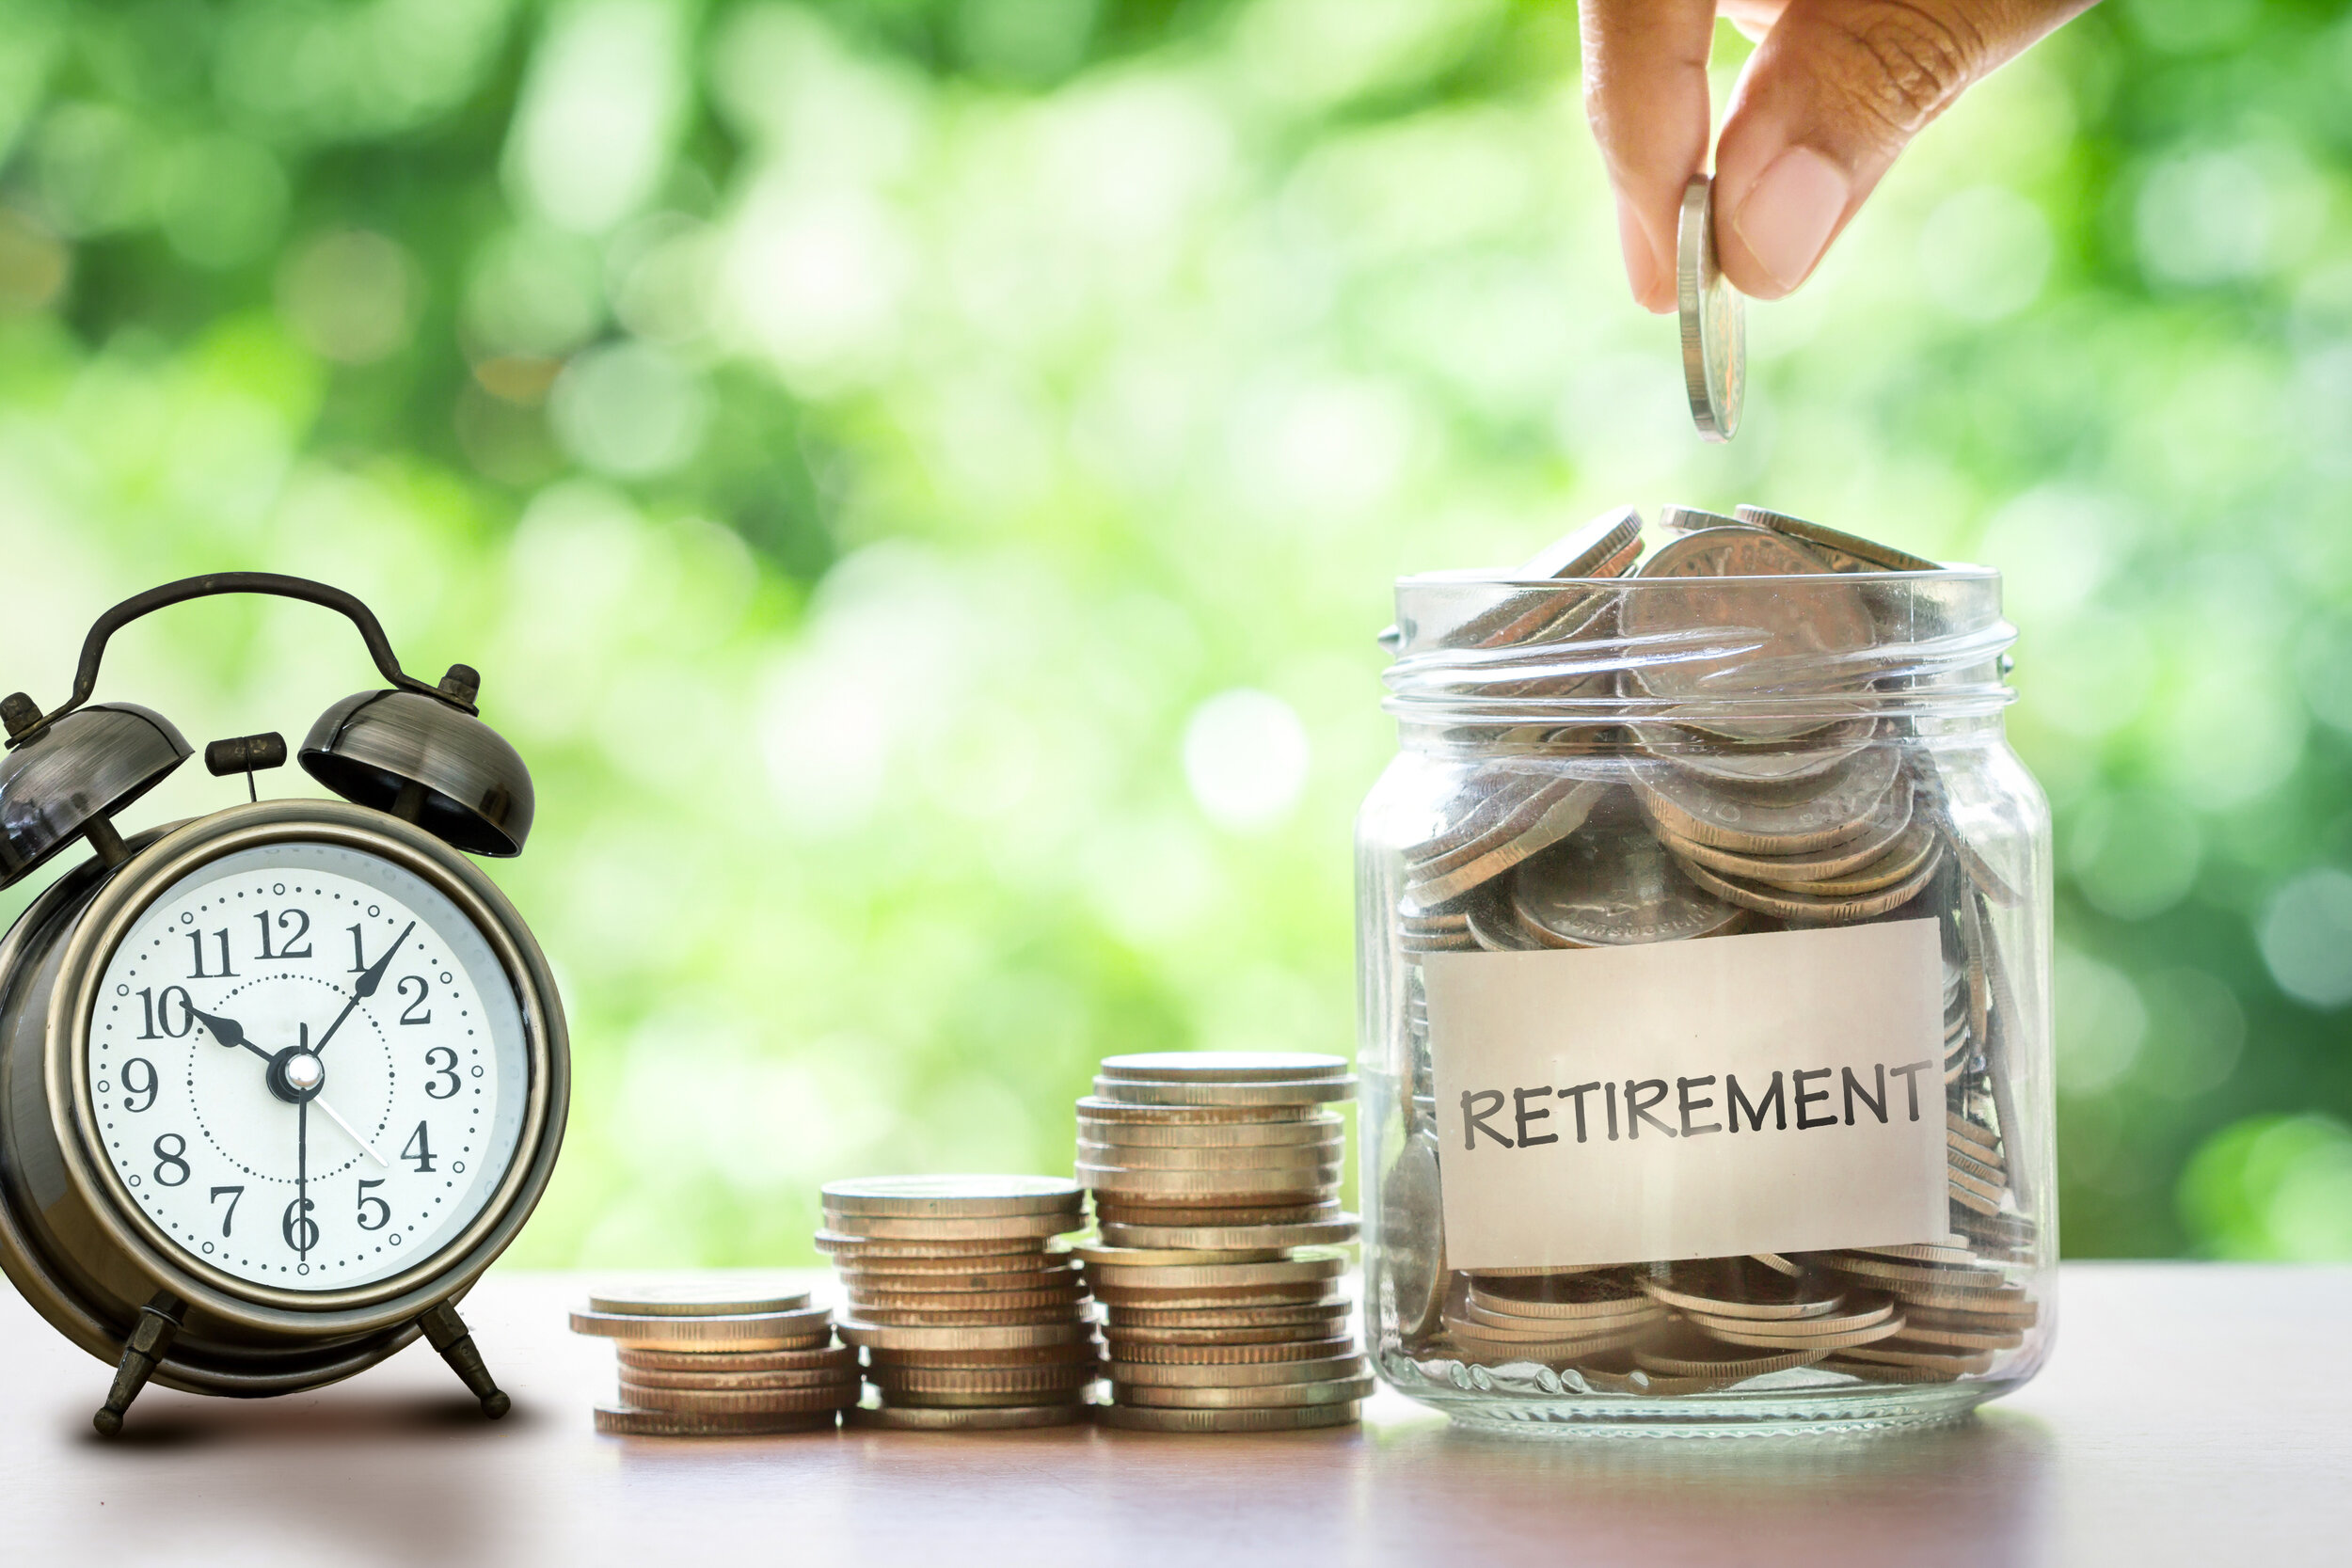 RETIREMENT INCOME PLANNING